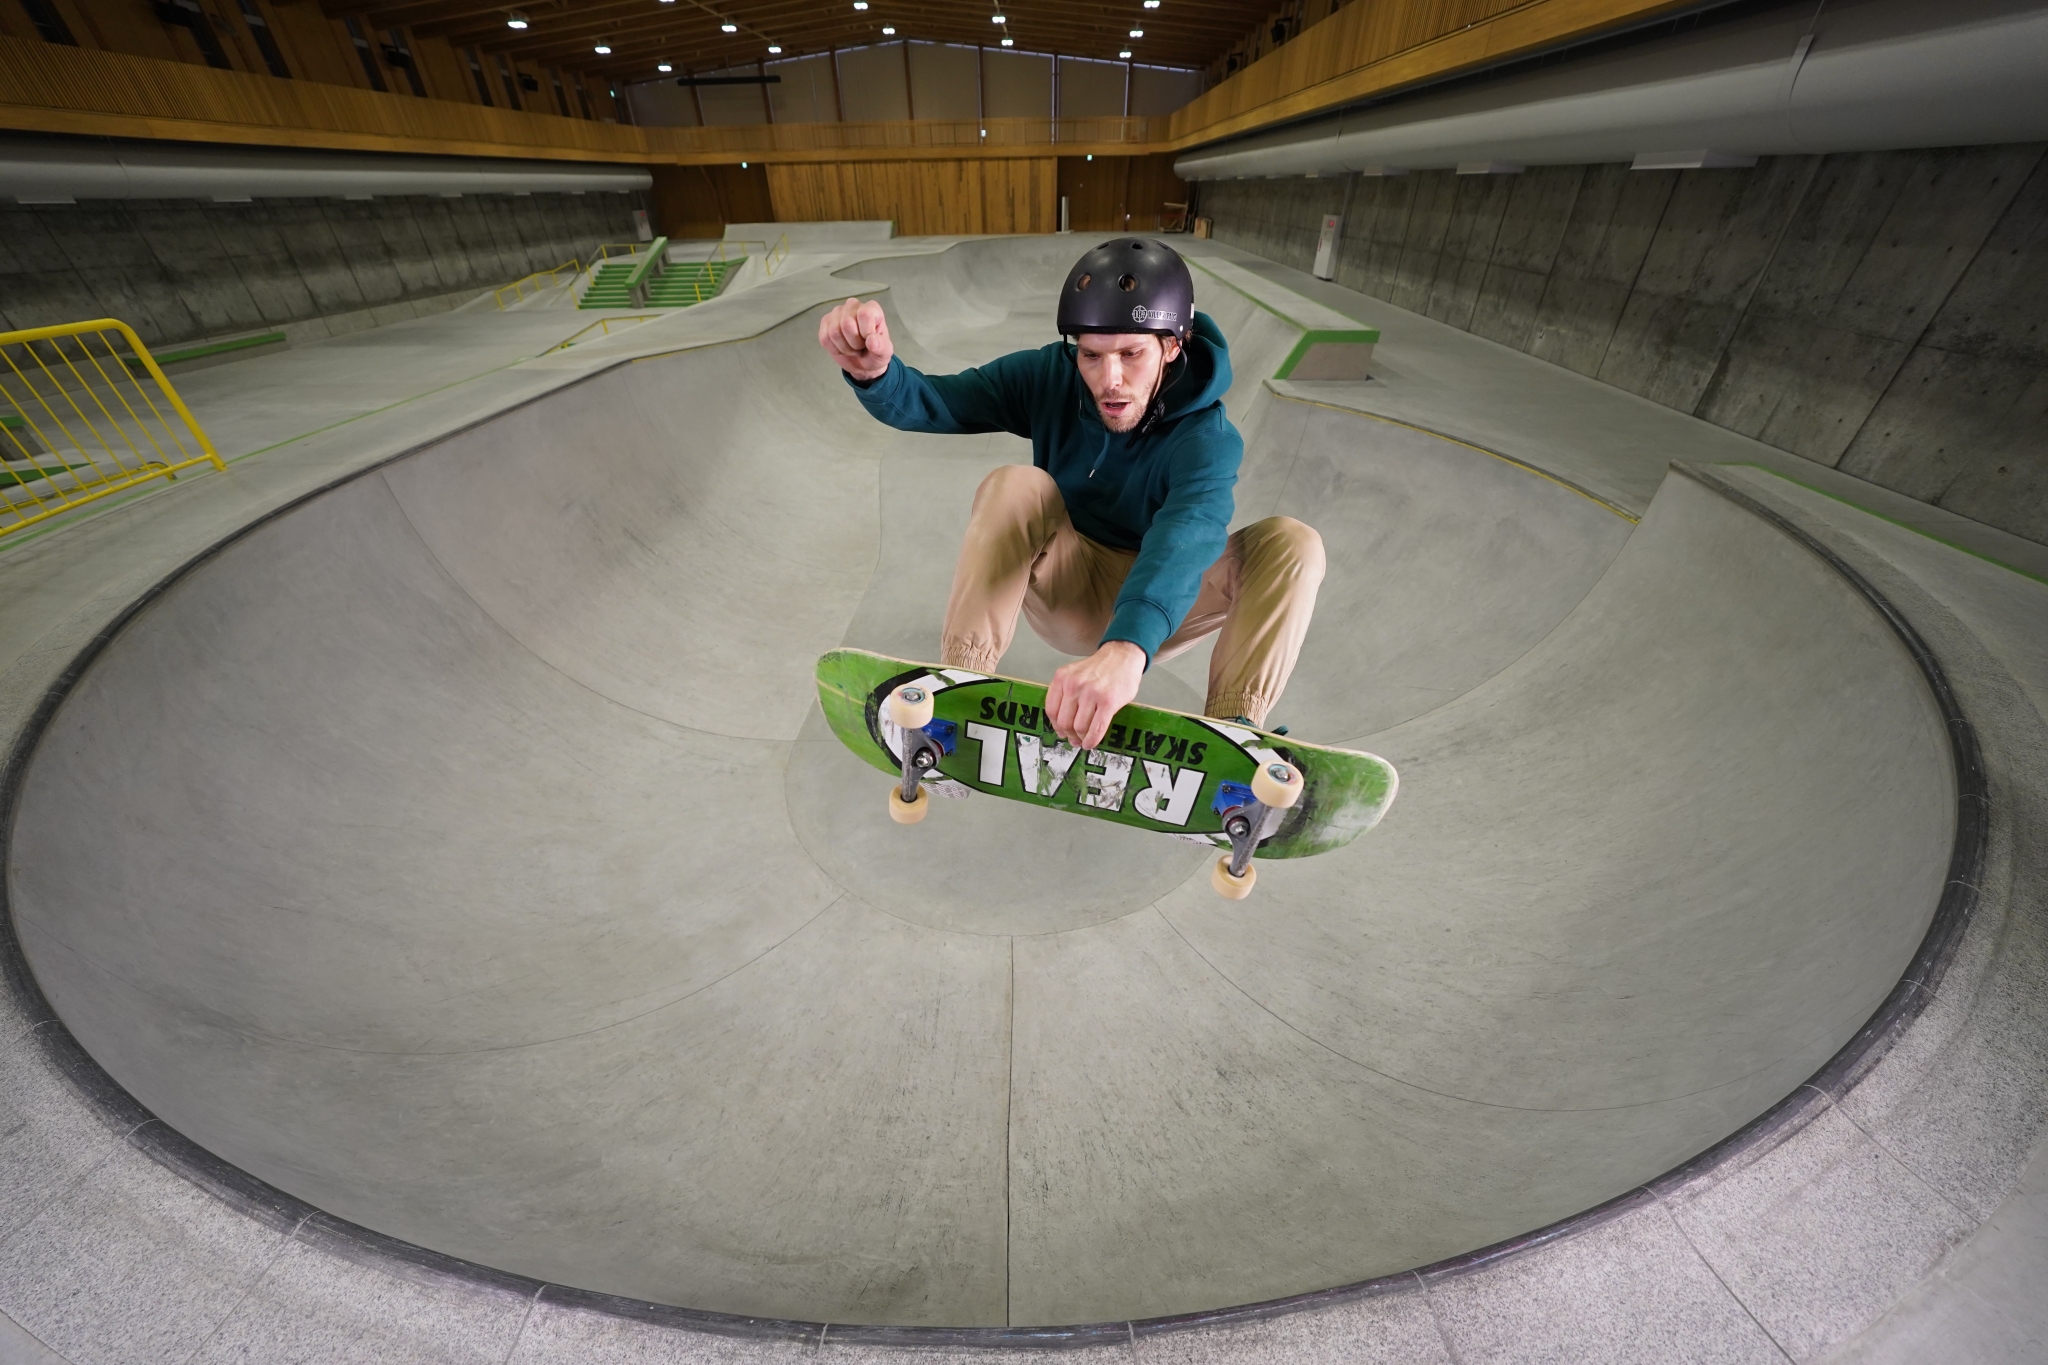 Male skateboarder performing a jump in a skateboard park